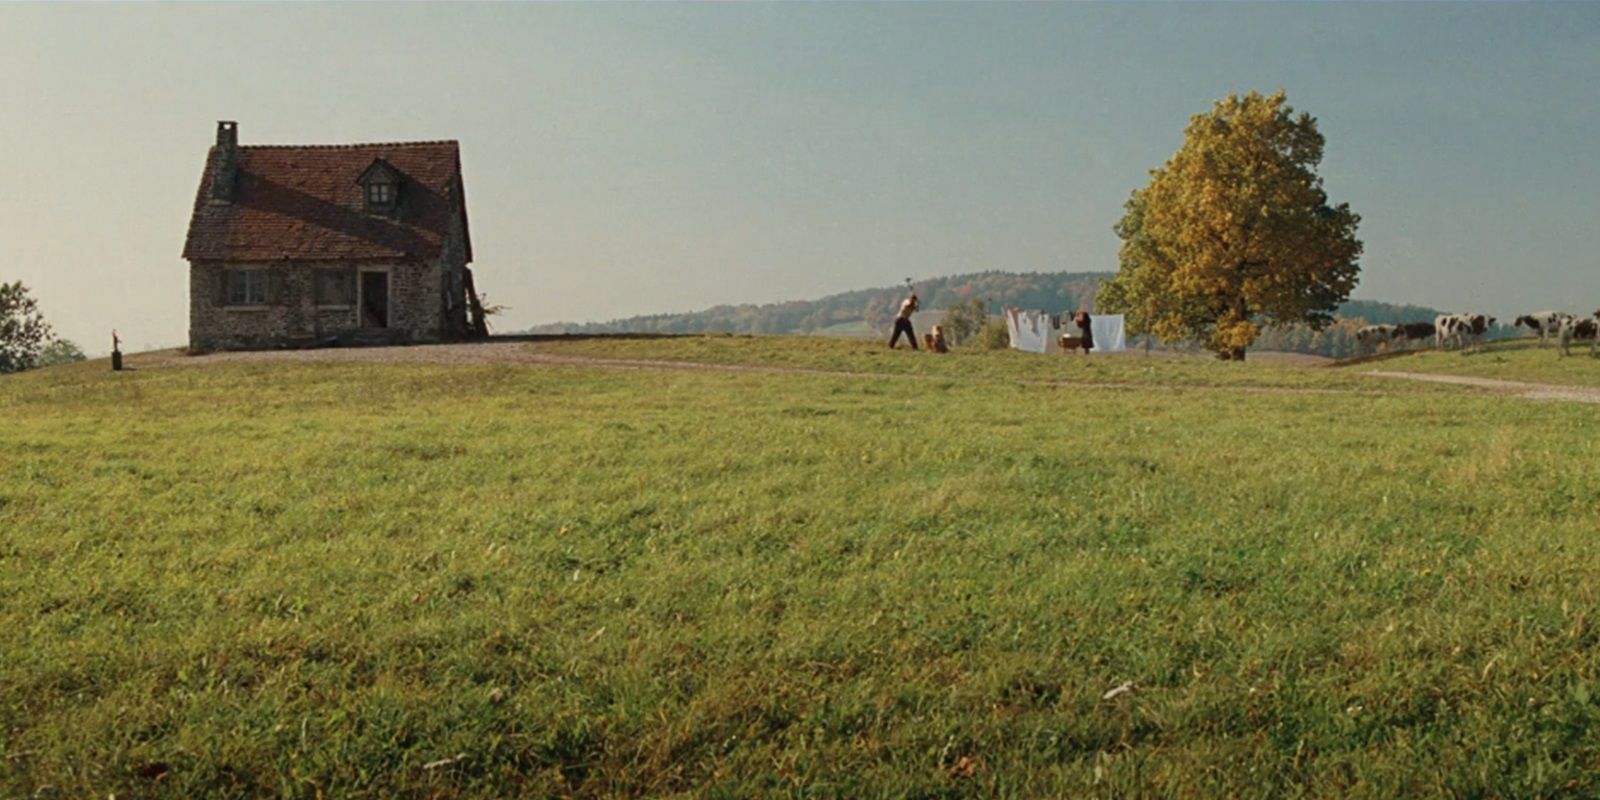 The opening shot of Inglourious Basterds